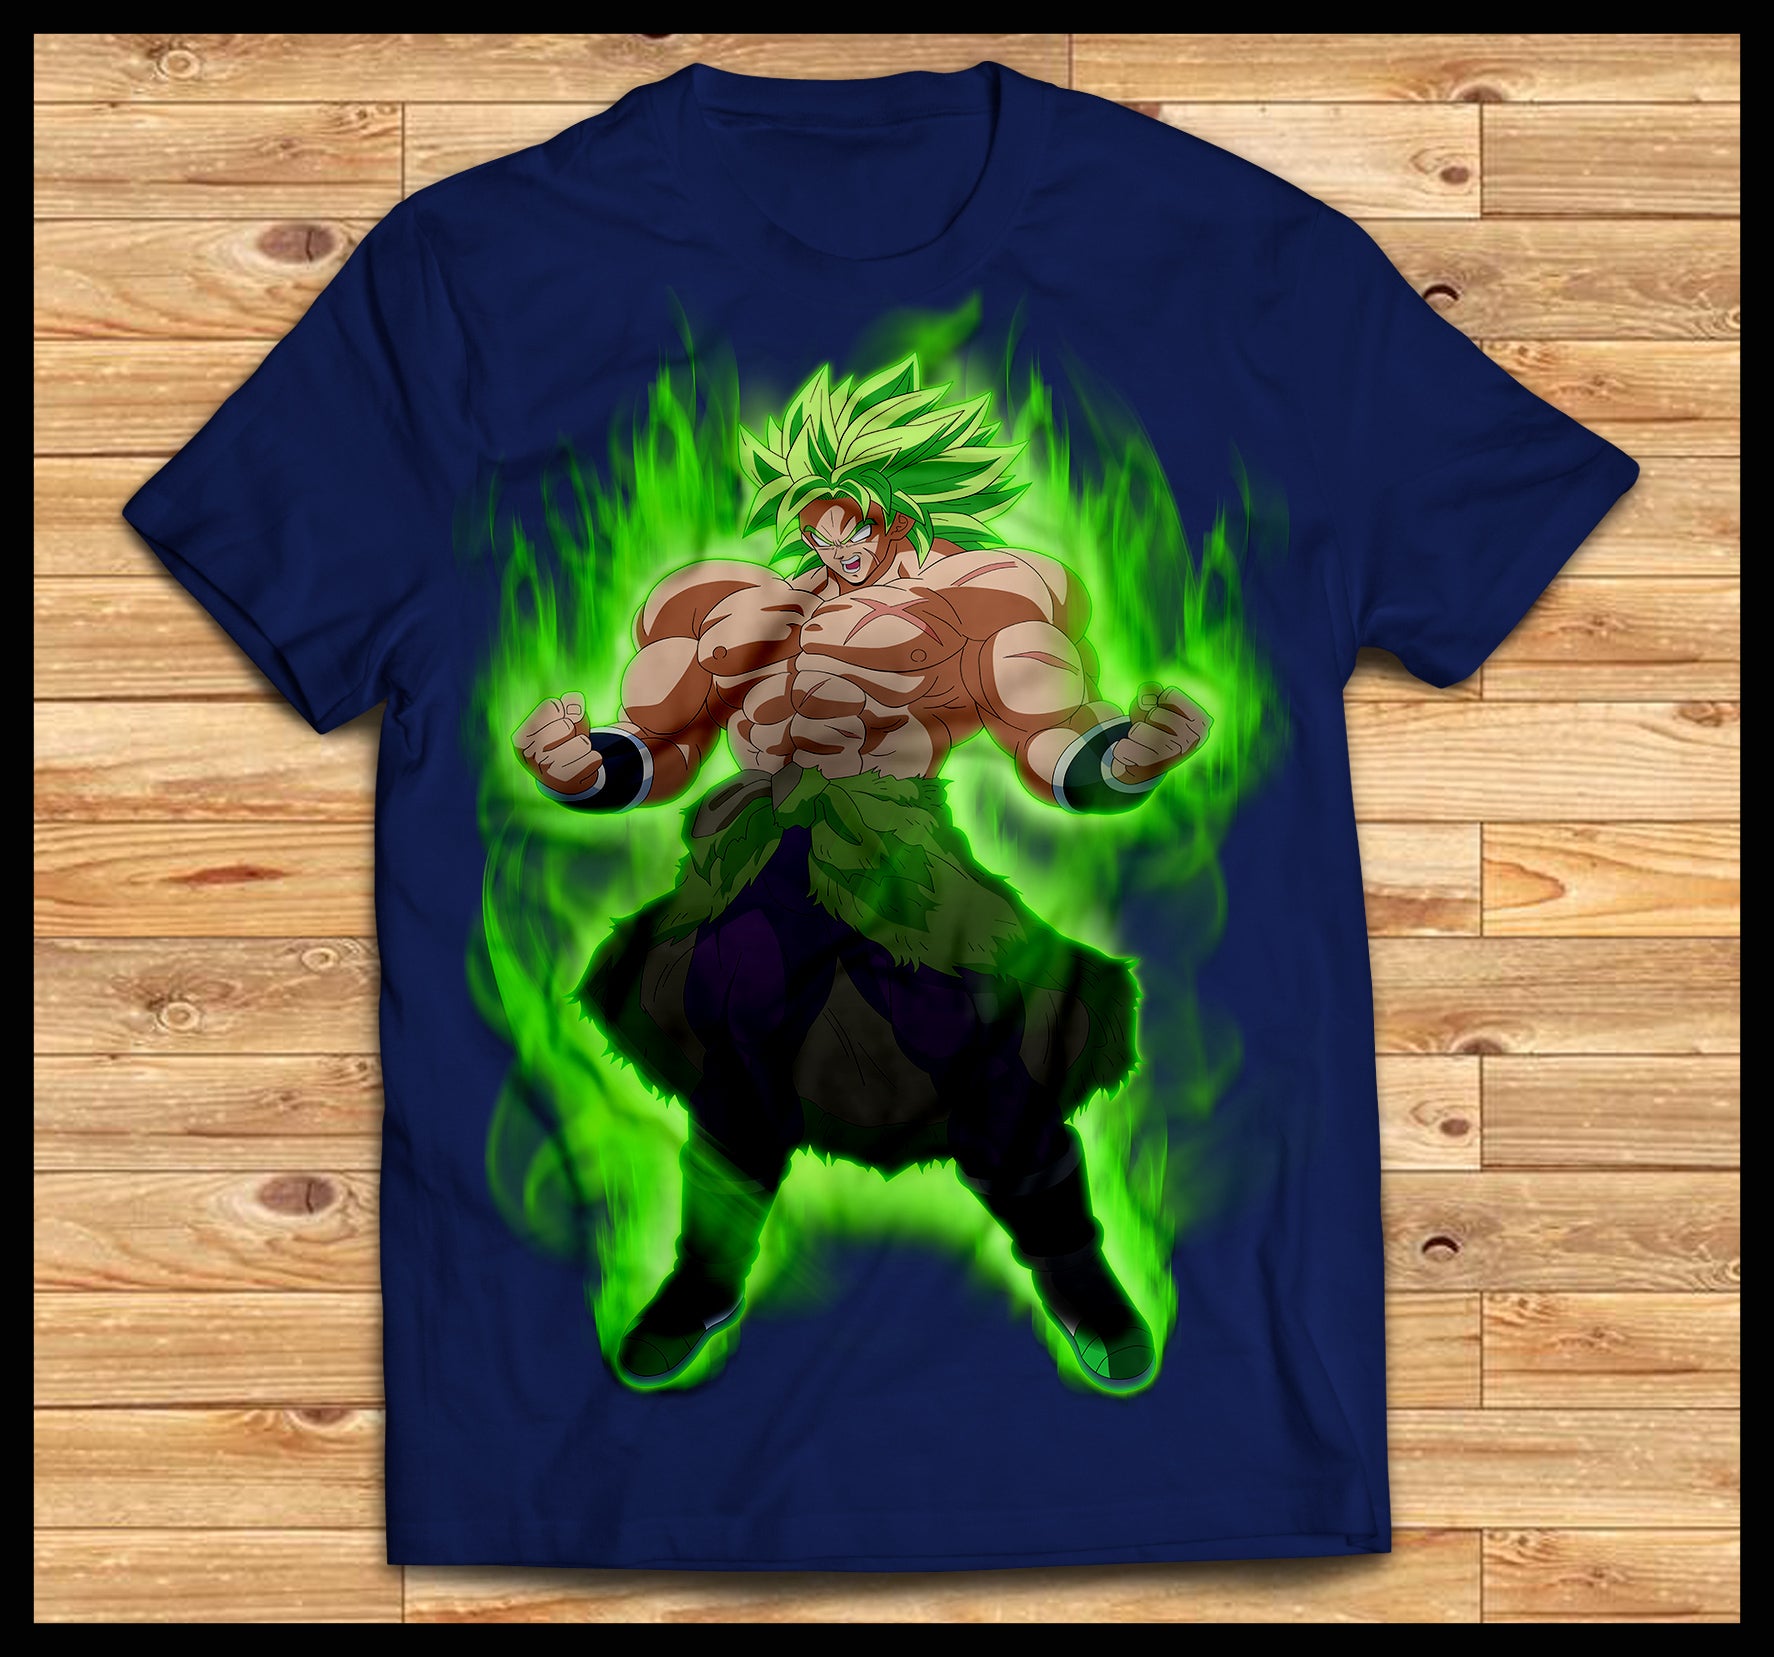 Broly 2022 The Movie Shirt